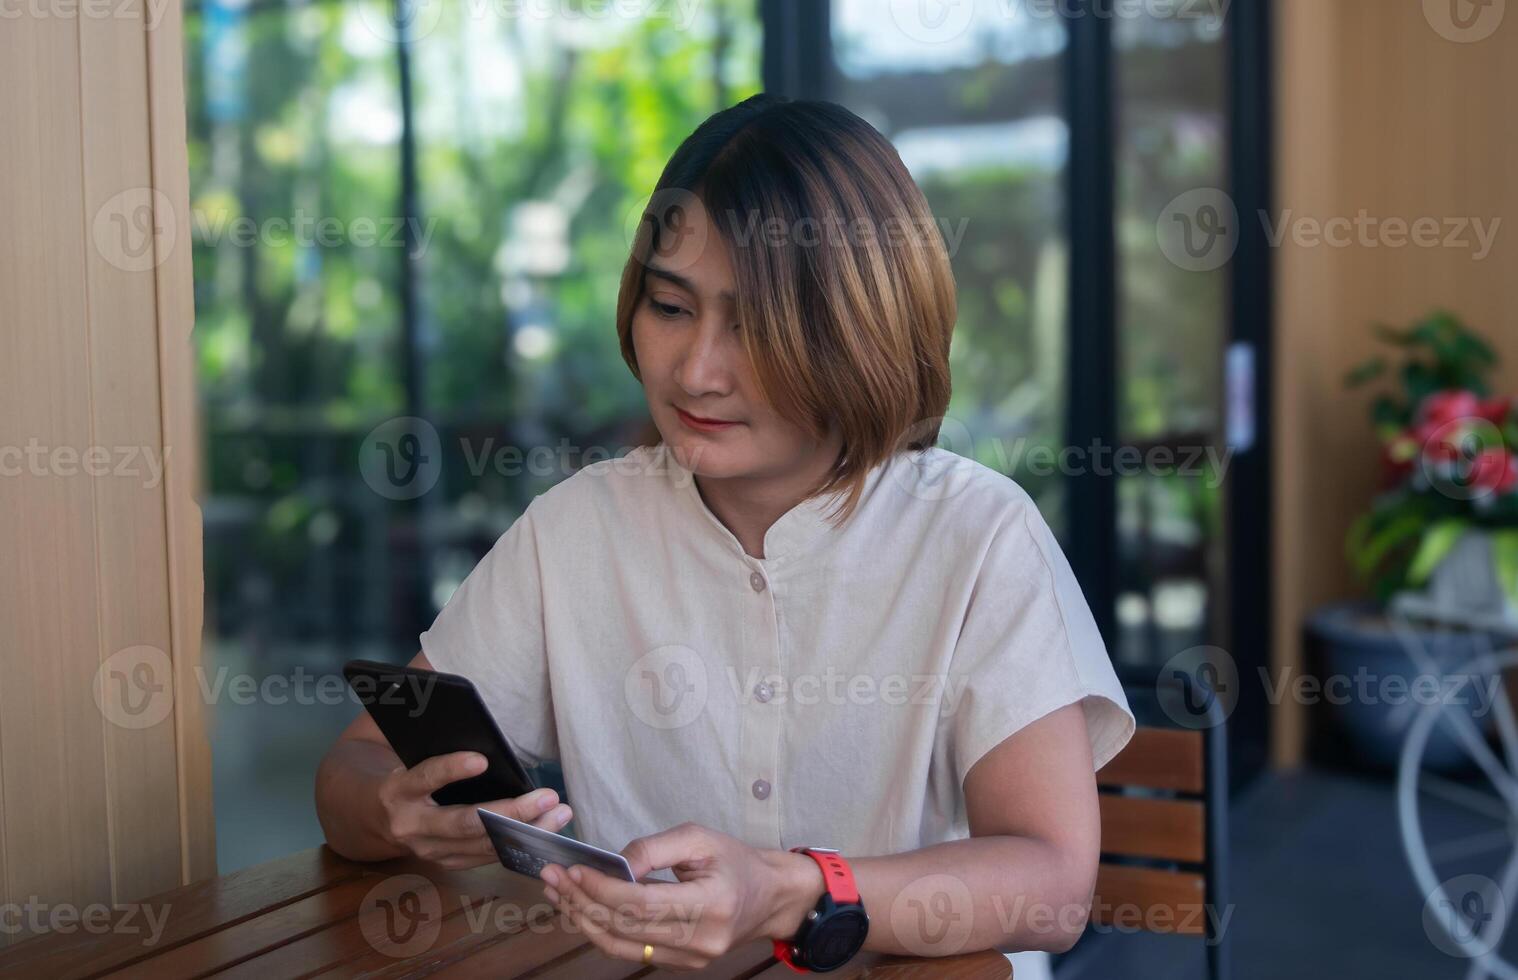 Women sitting on chair at outdoor the cafe holding credit cards and using smartphone to shopping online payments,Internet banking applications and e-commerce photo